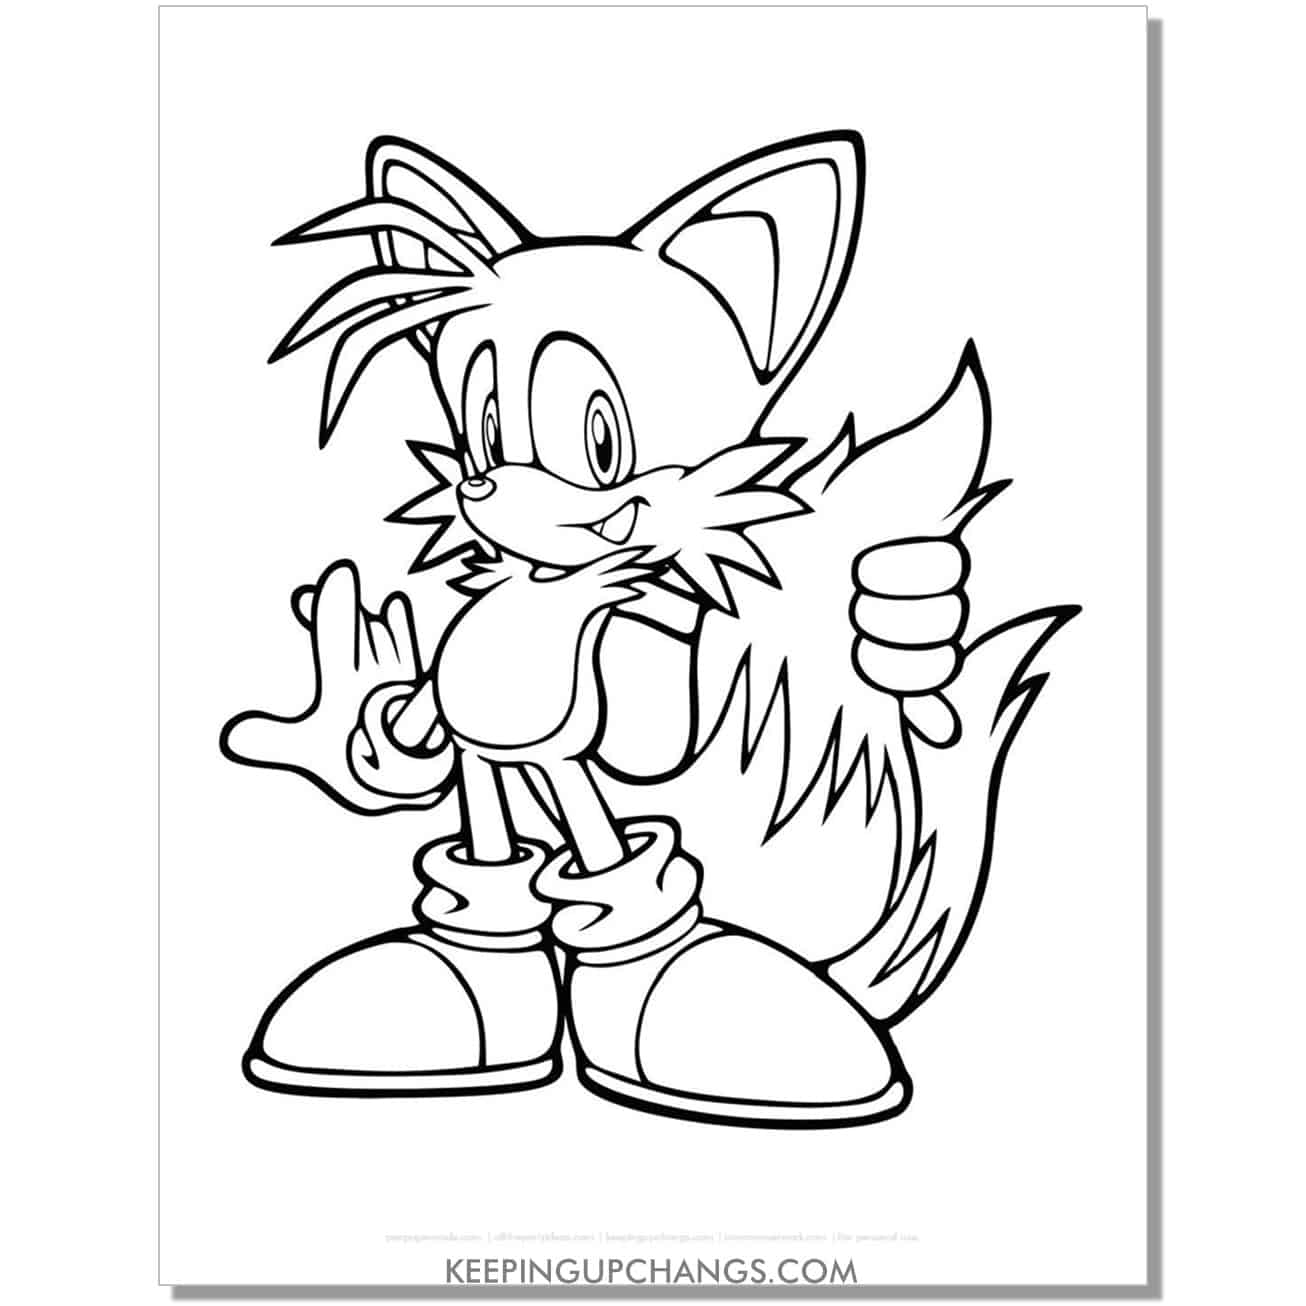 tails holding tail sonic coloring page.